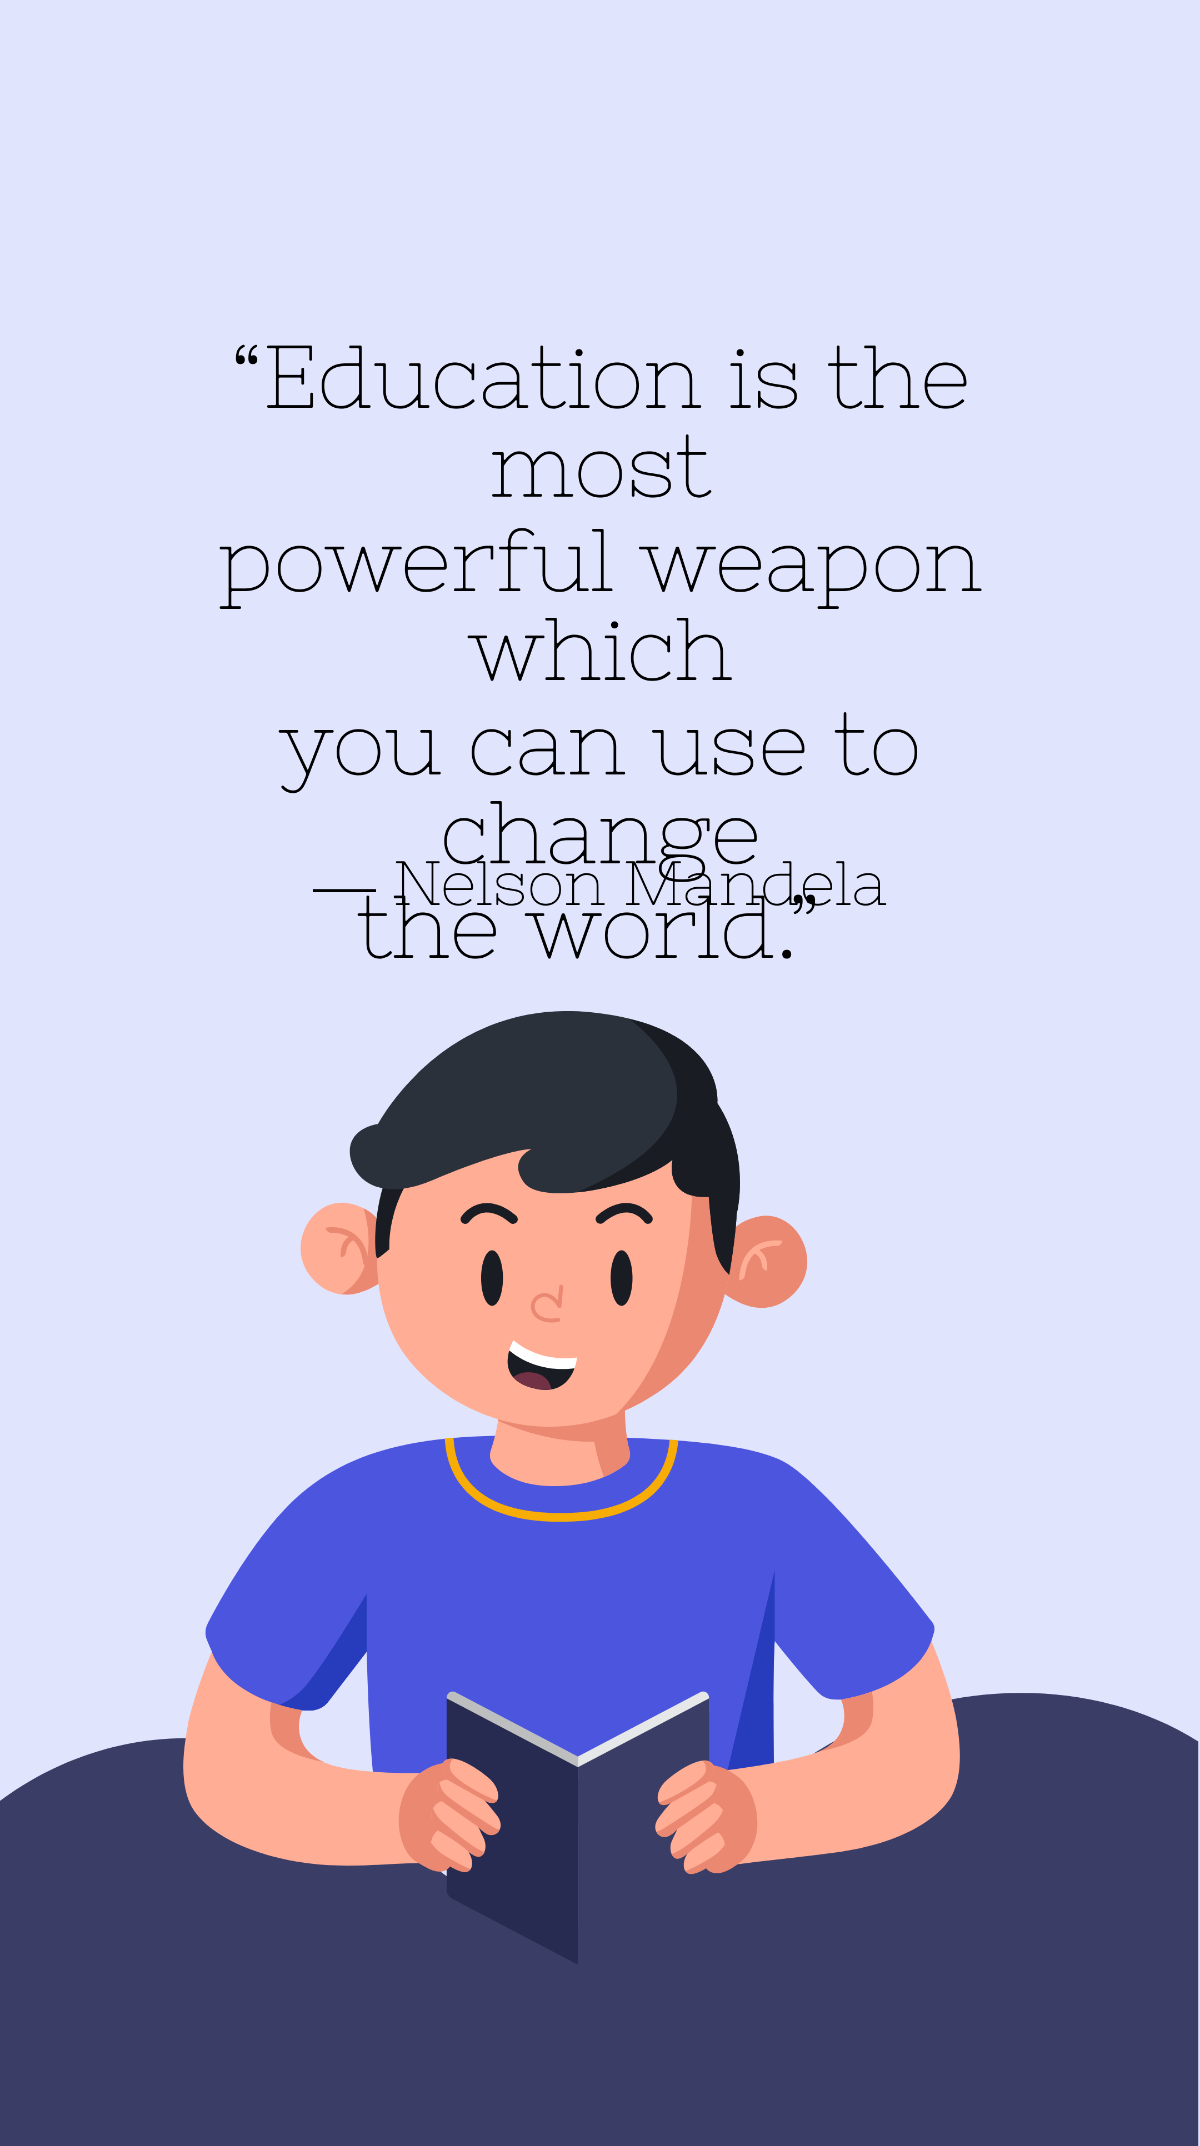 Nelson Mandela - Education is the most powerful weapon which you can use to change the world.